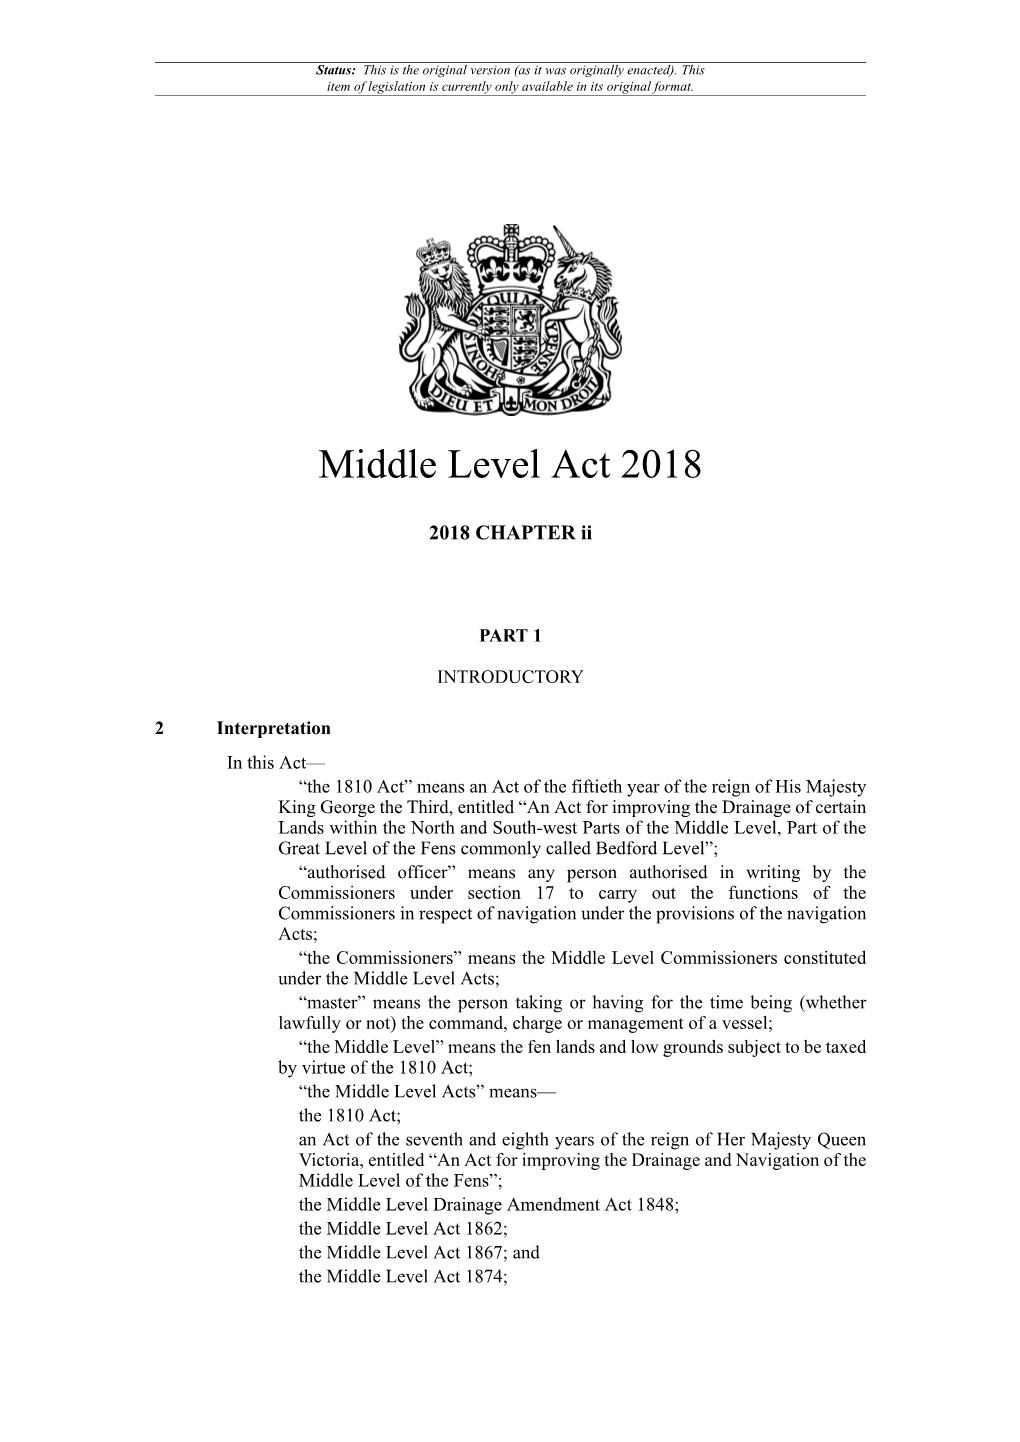 Middle Level Act 2018